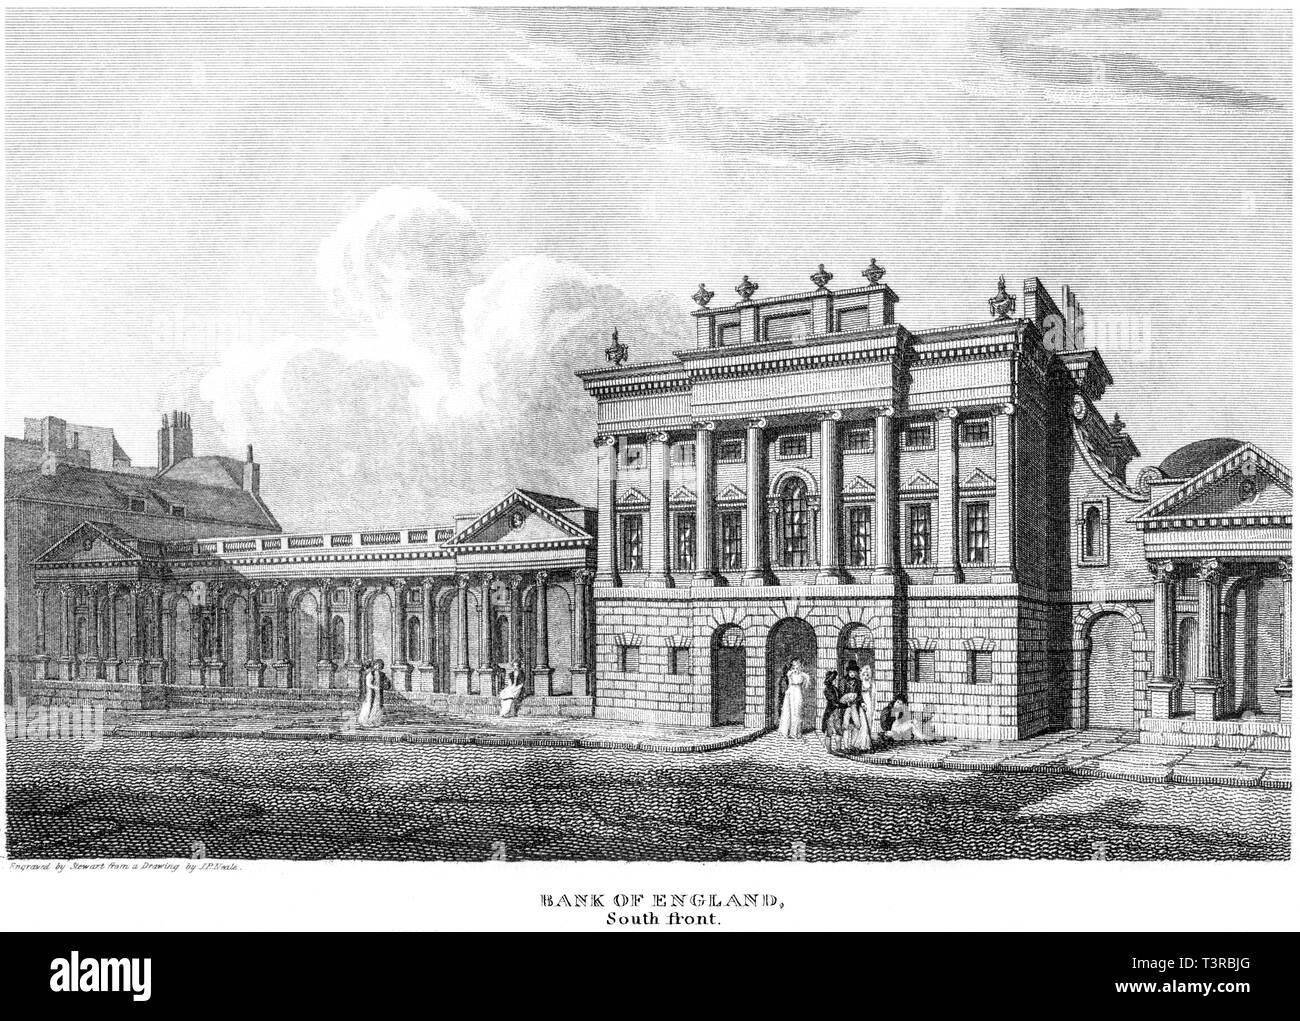 An engraving of The Bank of England South Front, London UK scanned at high resolution from a book published in 1814.  Believed copyright free. Stock Photo